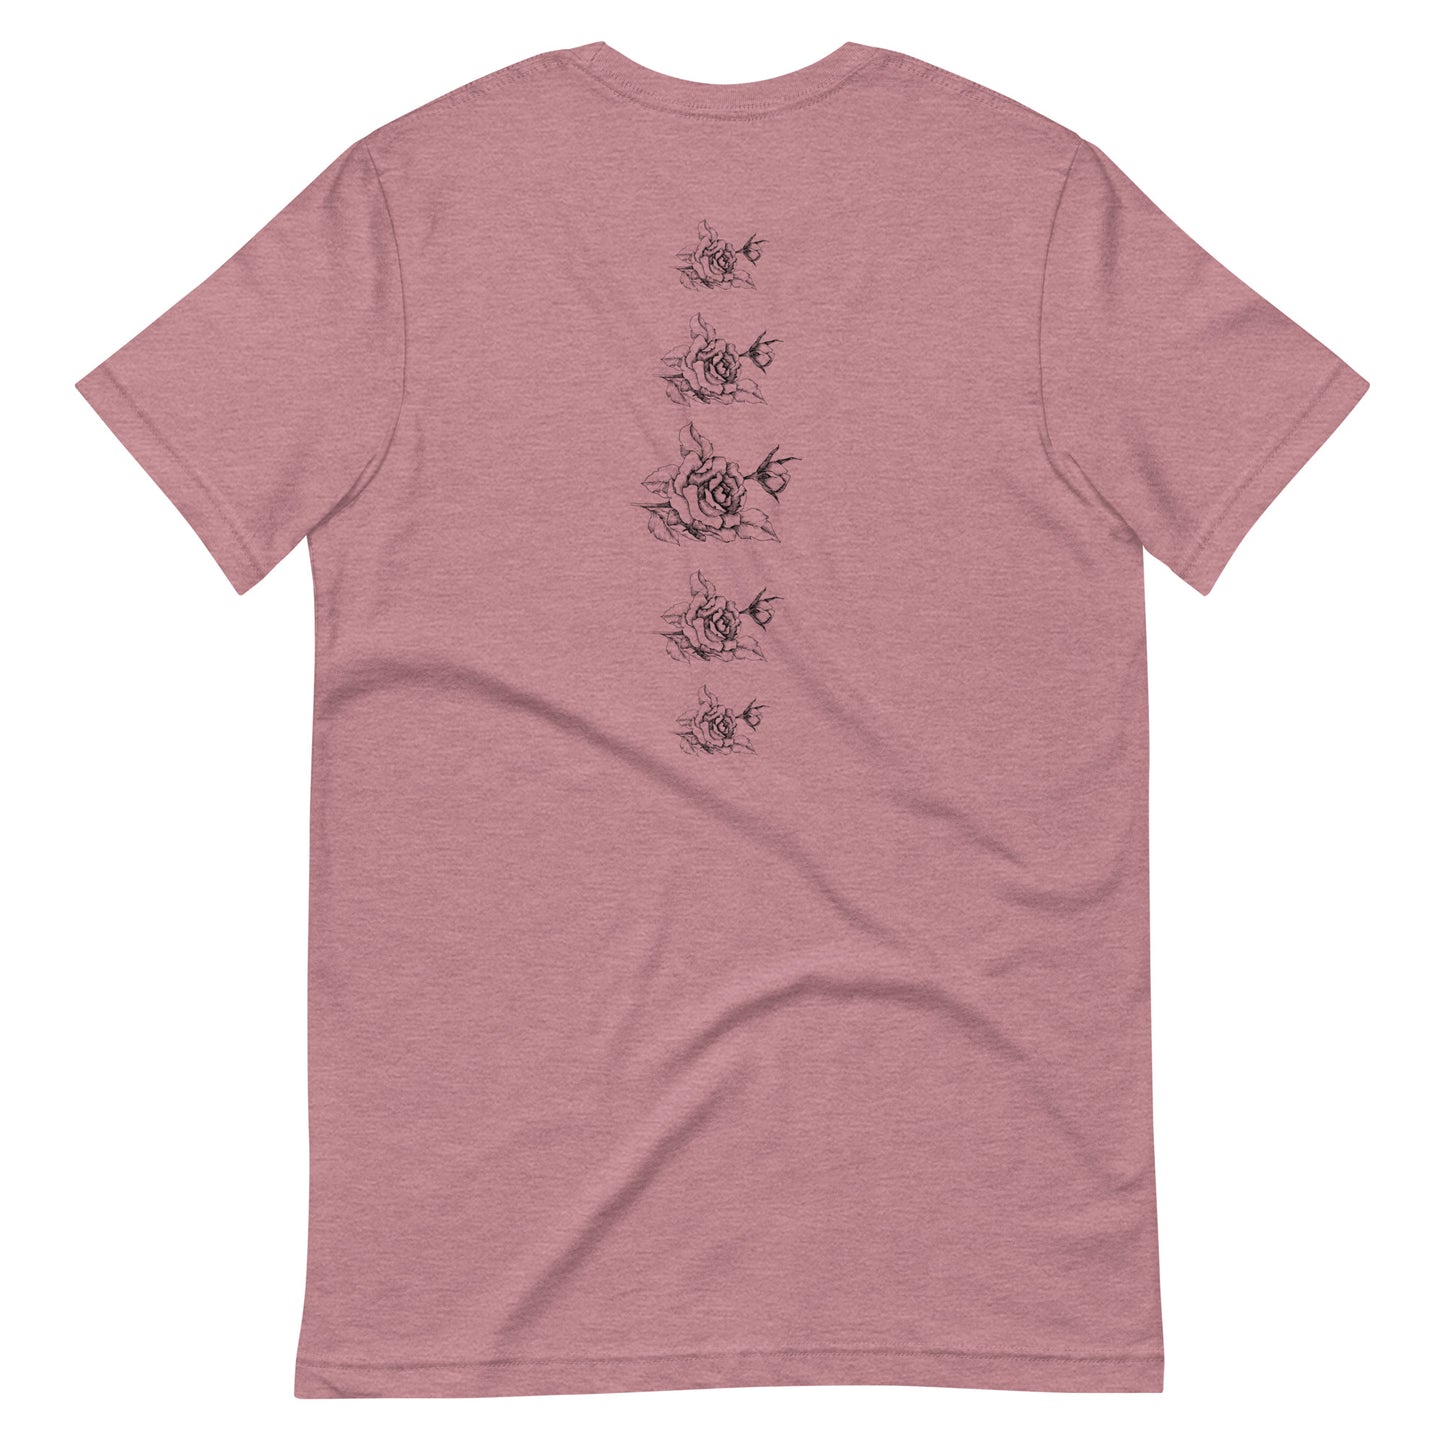 everything's rosy tee